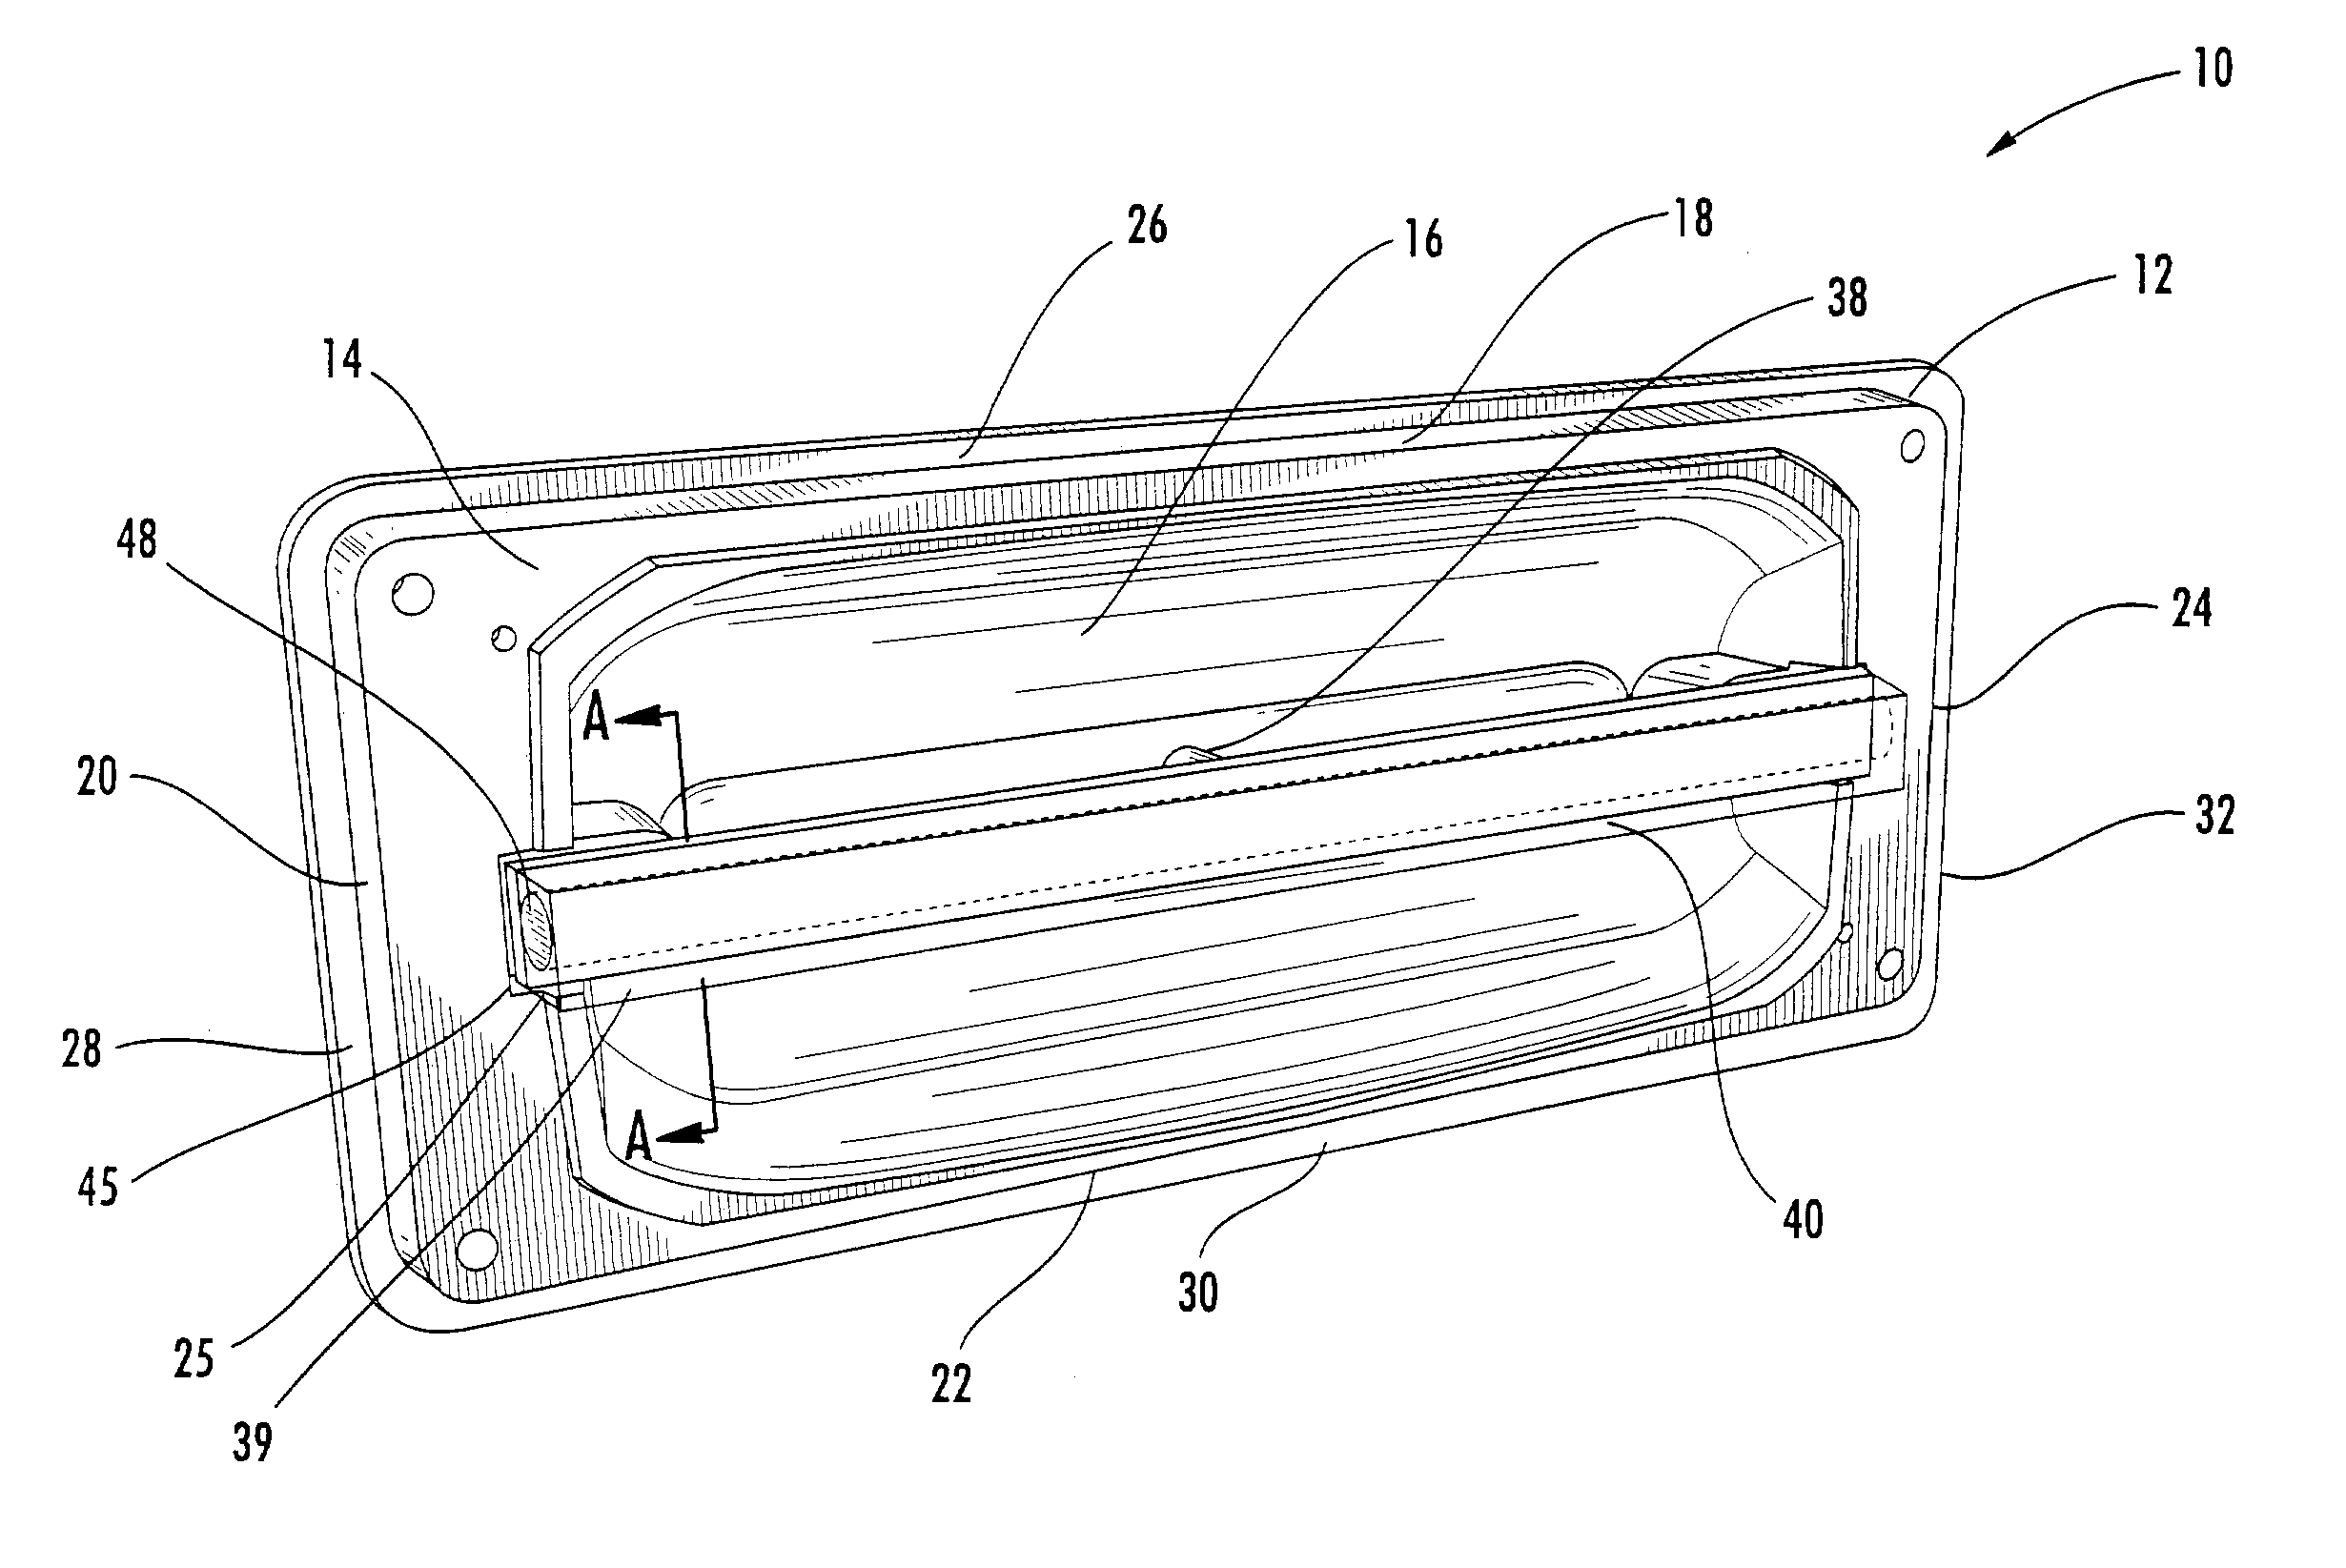 Light-emitting diode reflector assembly having a heat pipe